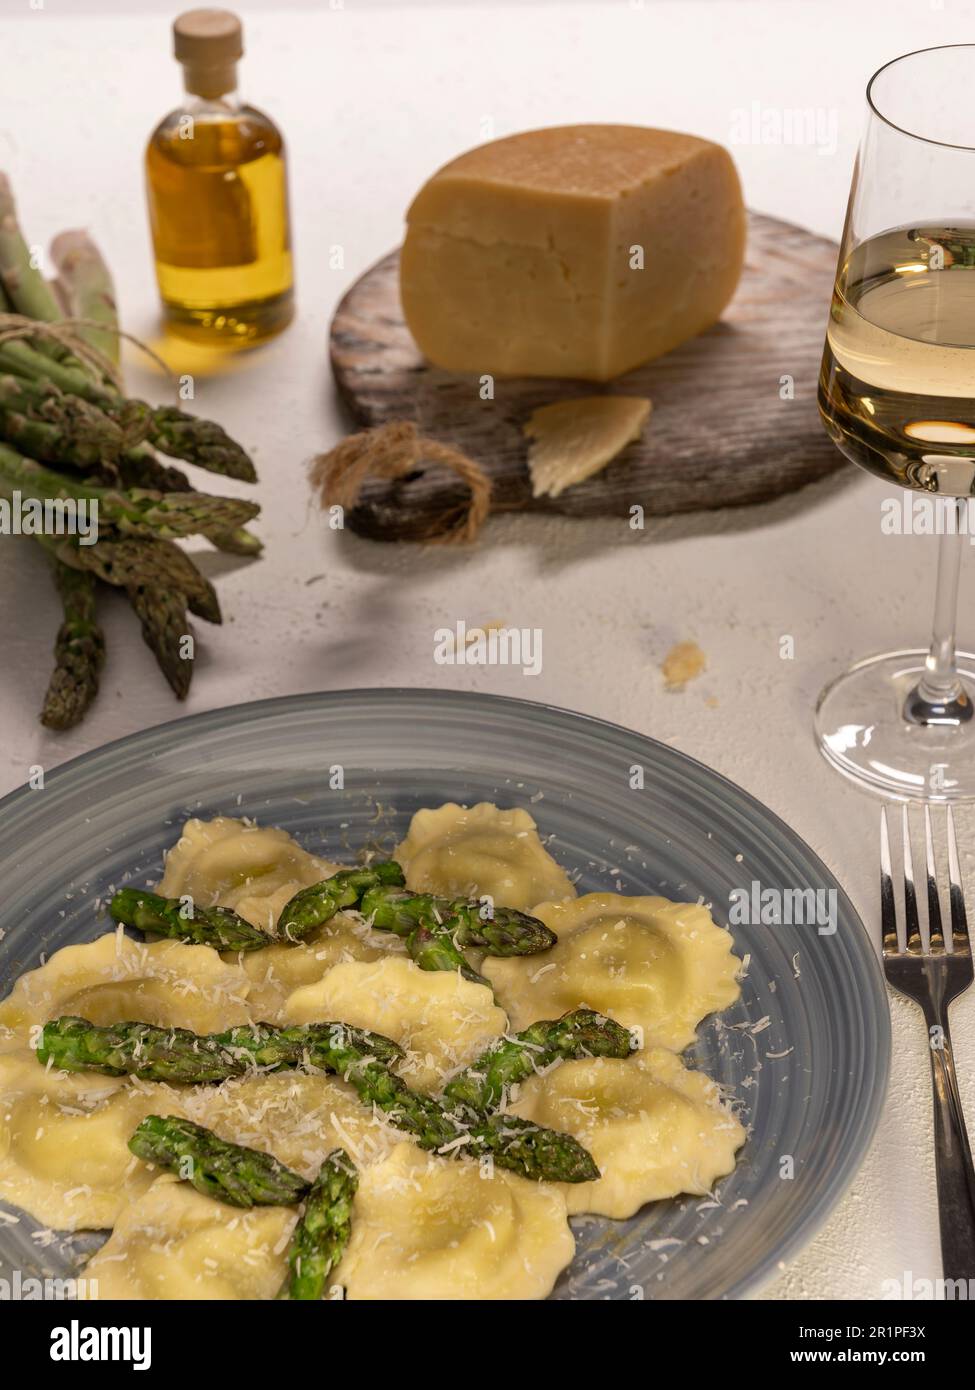 Asparagus tortellini with fried asparagus tips, served with white wine and decorated with fresh asparagus, olive oil and parmesan cheese Stock Photo